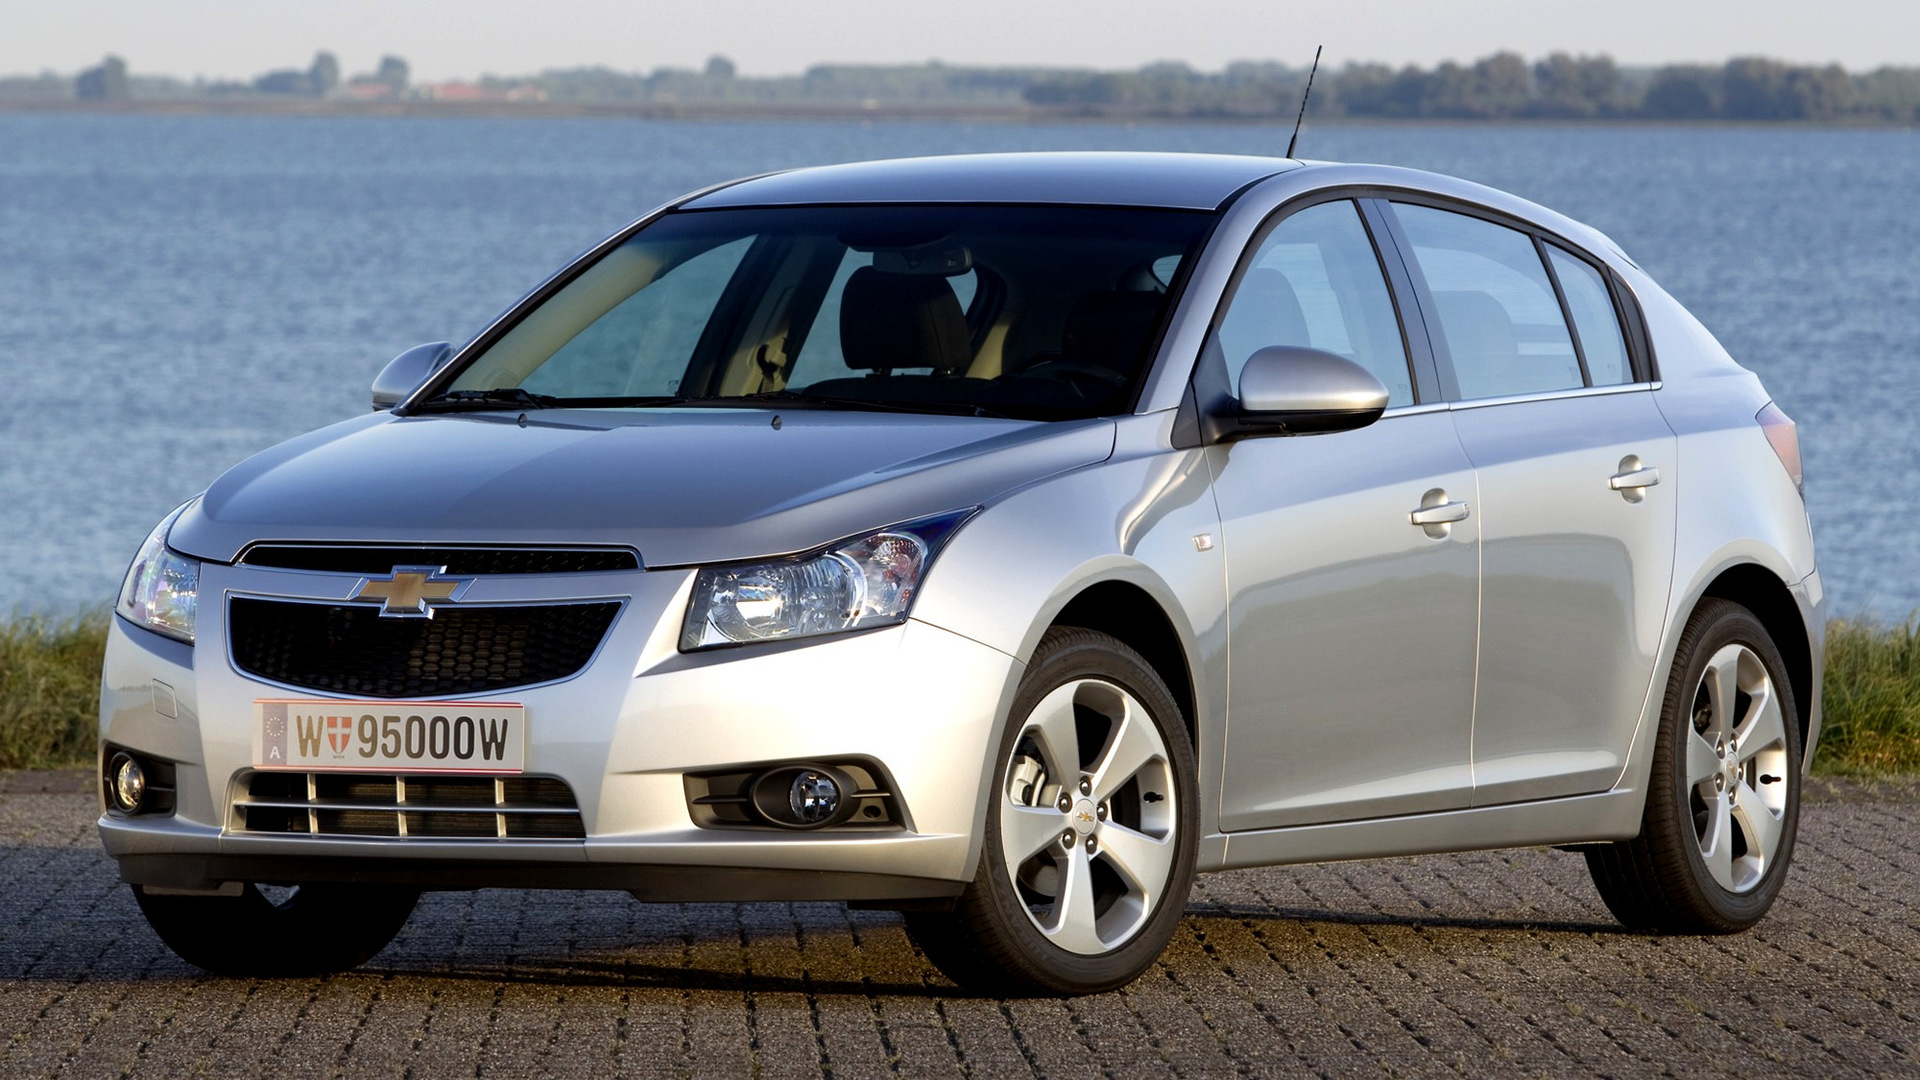 2011 Chevrolet Cruze Hatchback Wallpapers and HD Images